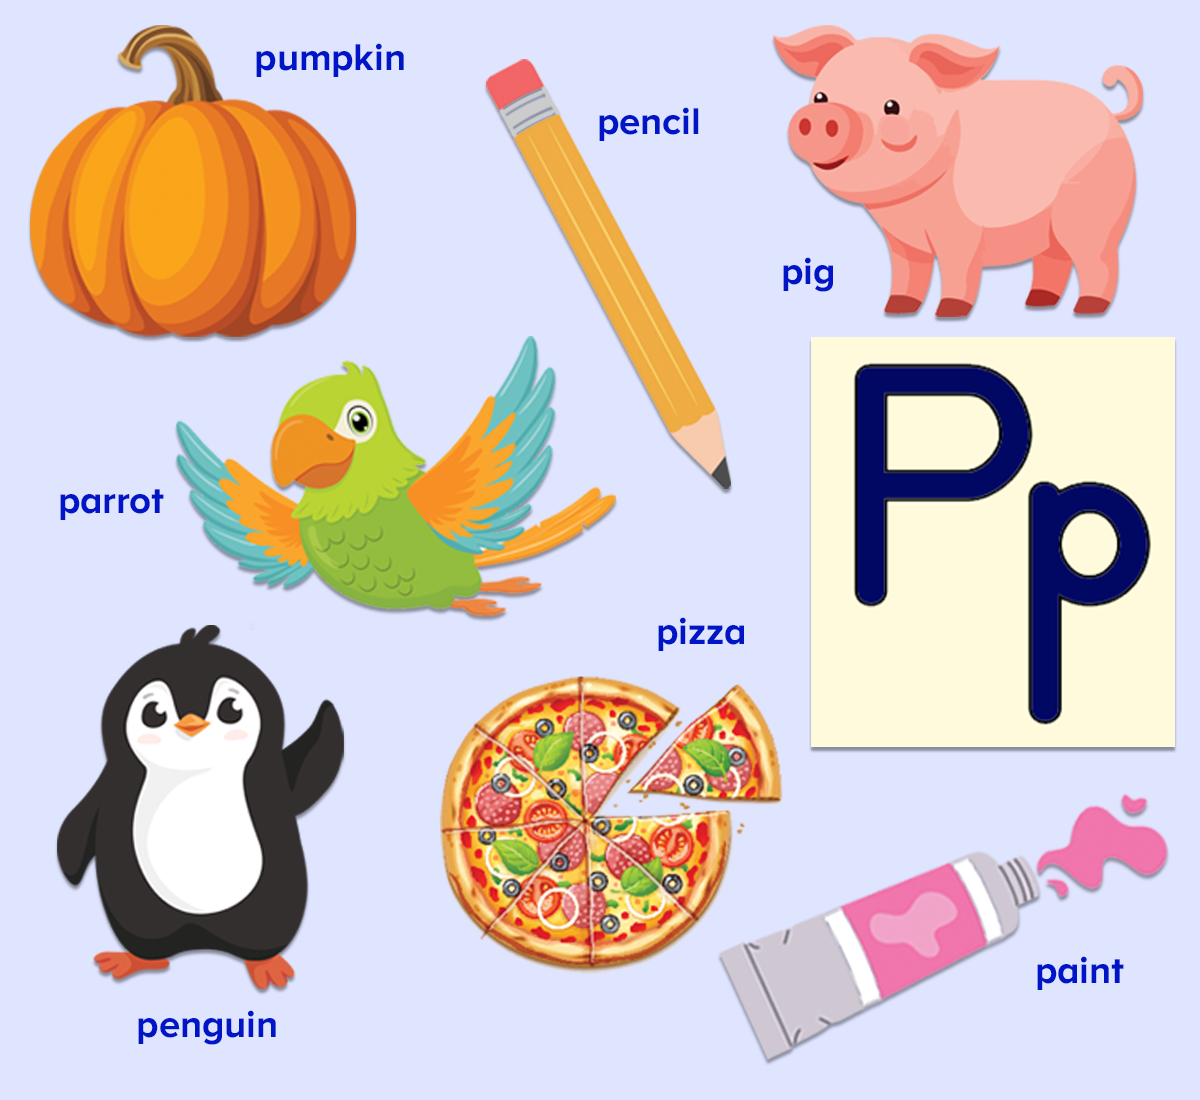 Words that start with the letter p colorful poster for kids featuring, pumpkin, pig, pencil, parrot, penguin, pizza, and paint. 